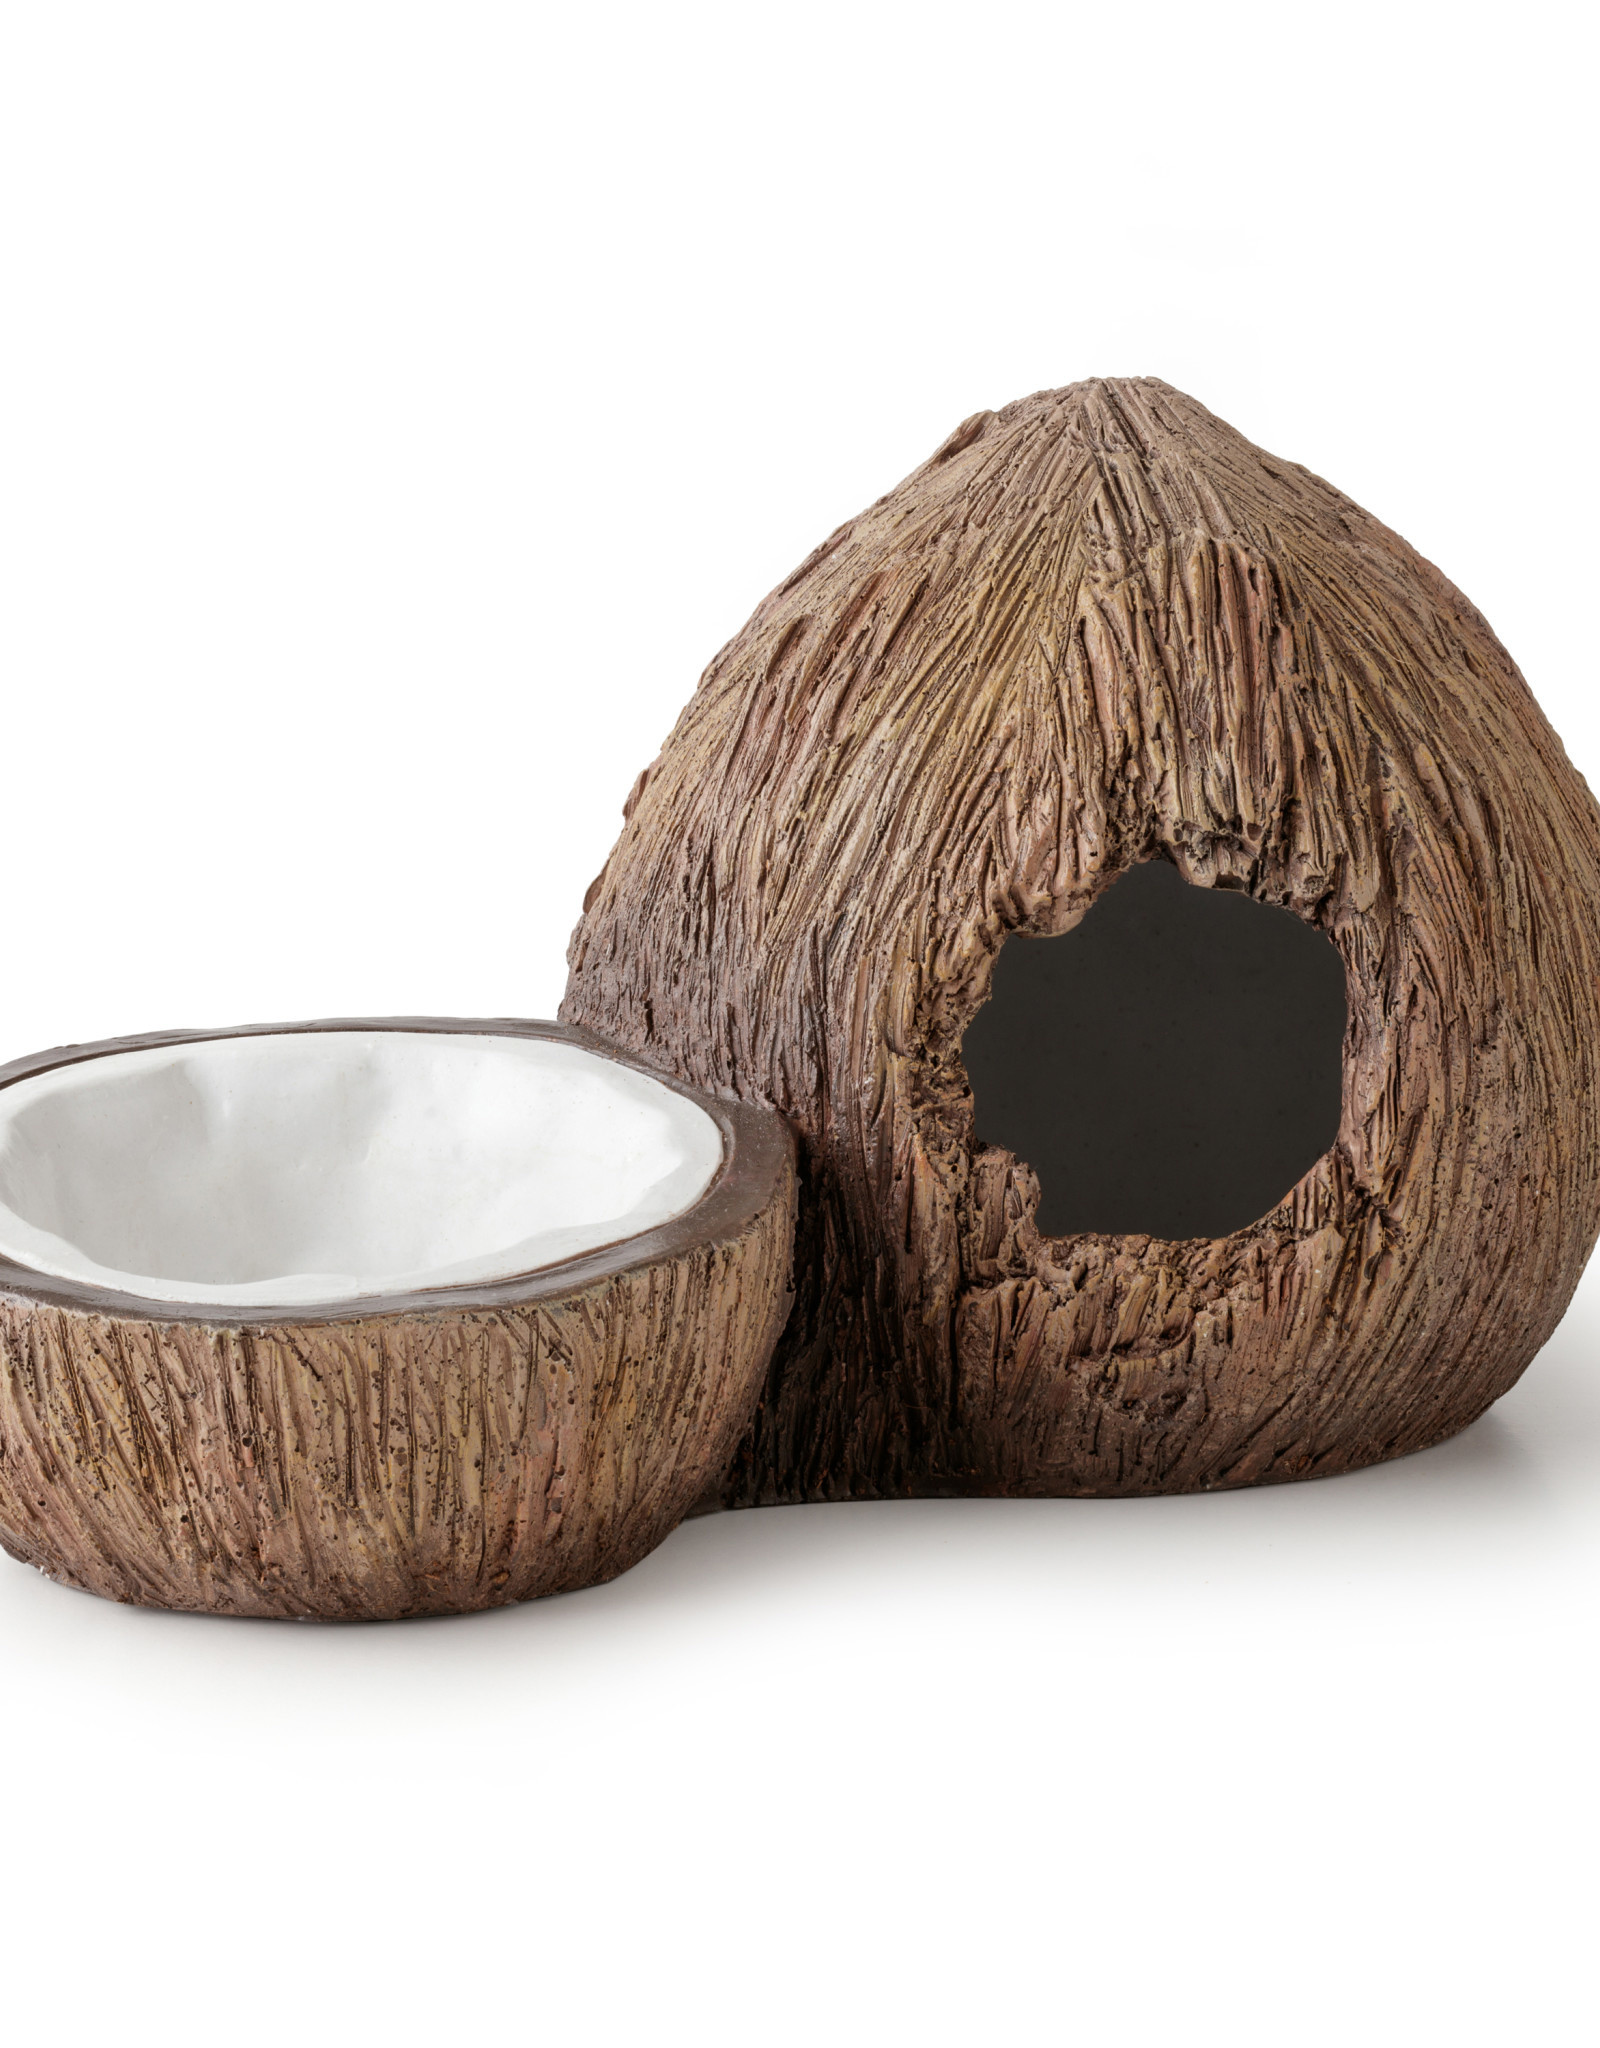 EXO TERRA EXO TERRA- PT3159- HIDE AND WATER DISH- COCONUT STYLE- 5.5X5.5X9